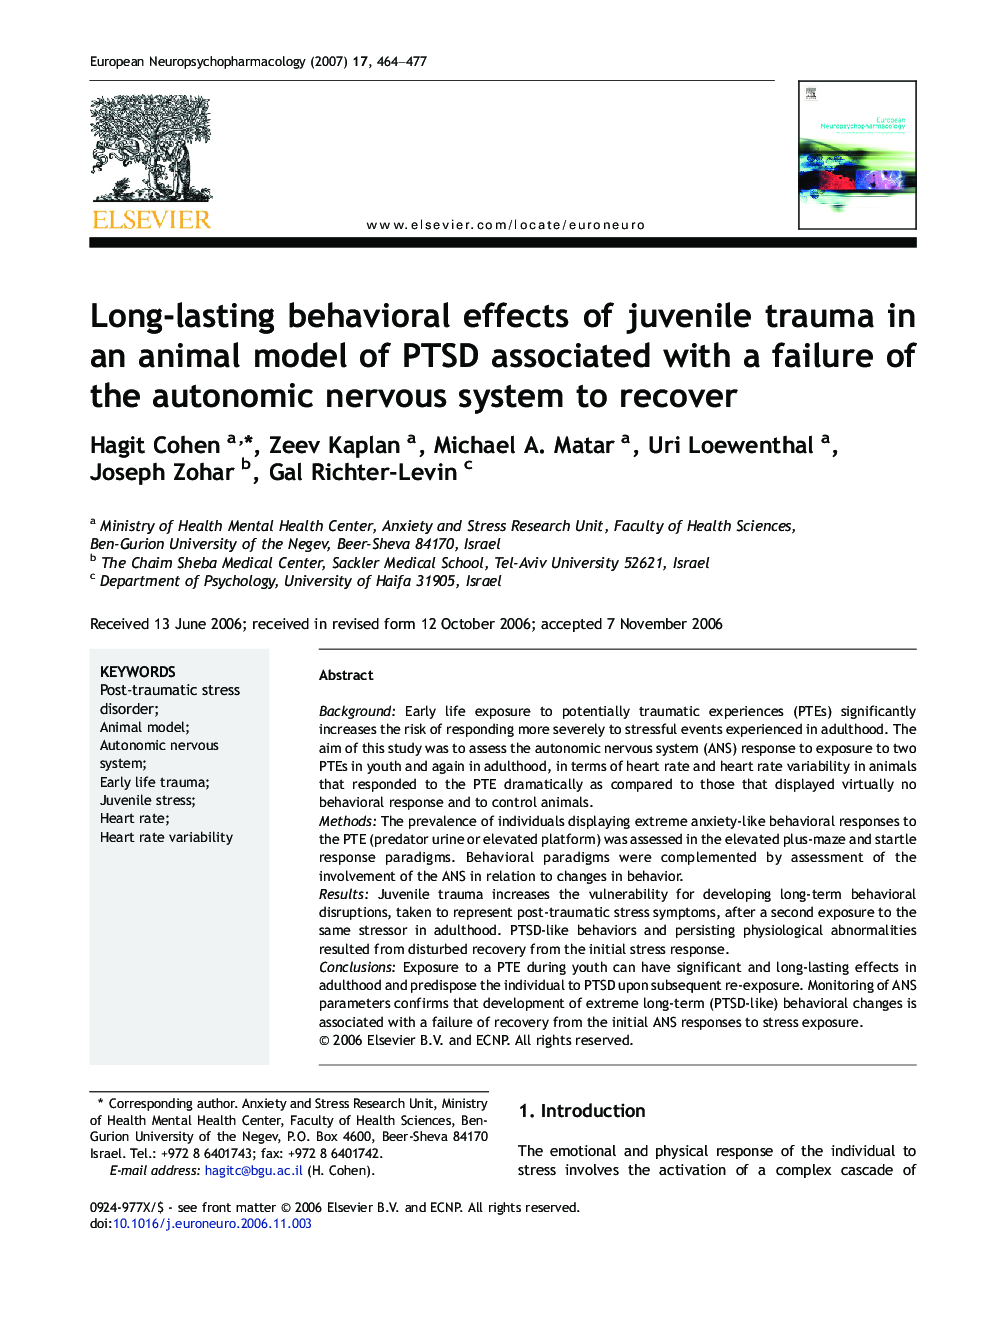 Long-lasting behavioral effects of juvenile trauma in an animal model of PTSD associated with a failure of the autonomic nervous system to recover